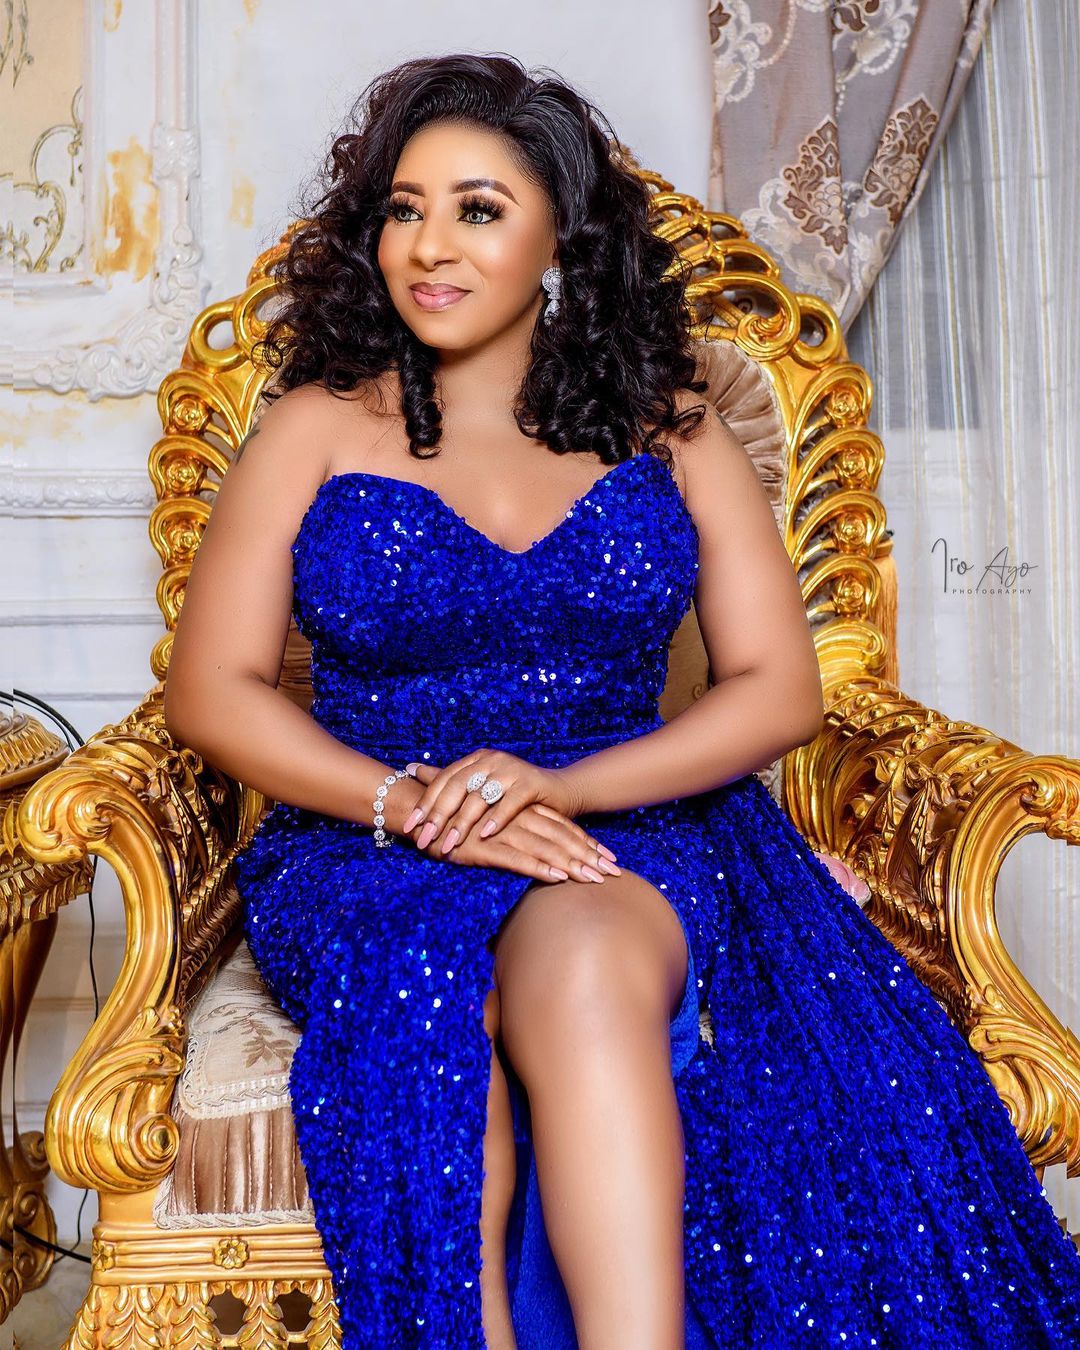 Afeez Owo Reaffirms Love For Wife, Mide Martins, In Birthday Post